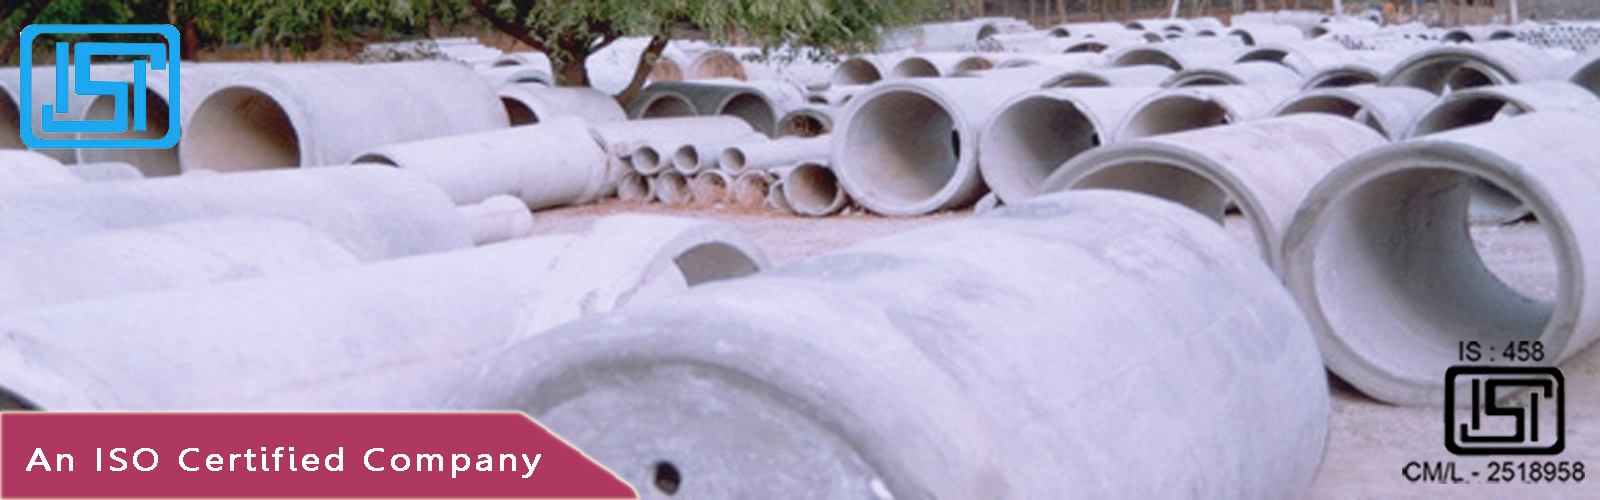 RCC Spun Pipes in nagpur | Cement Pipes and electric poles in Nagpur